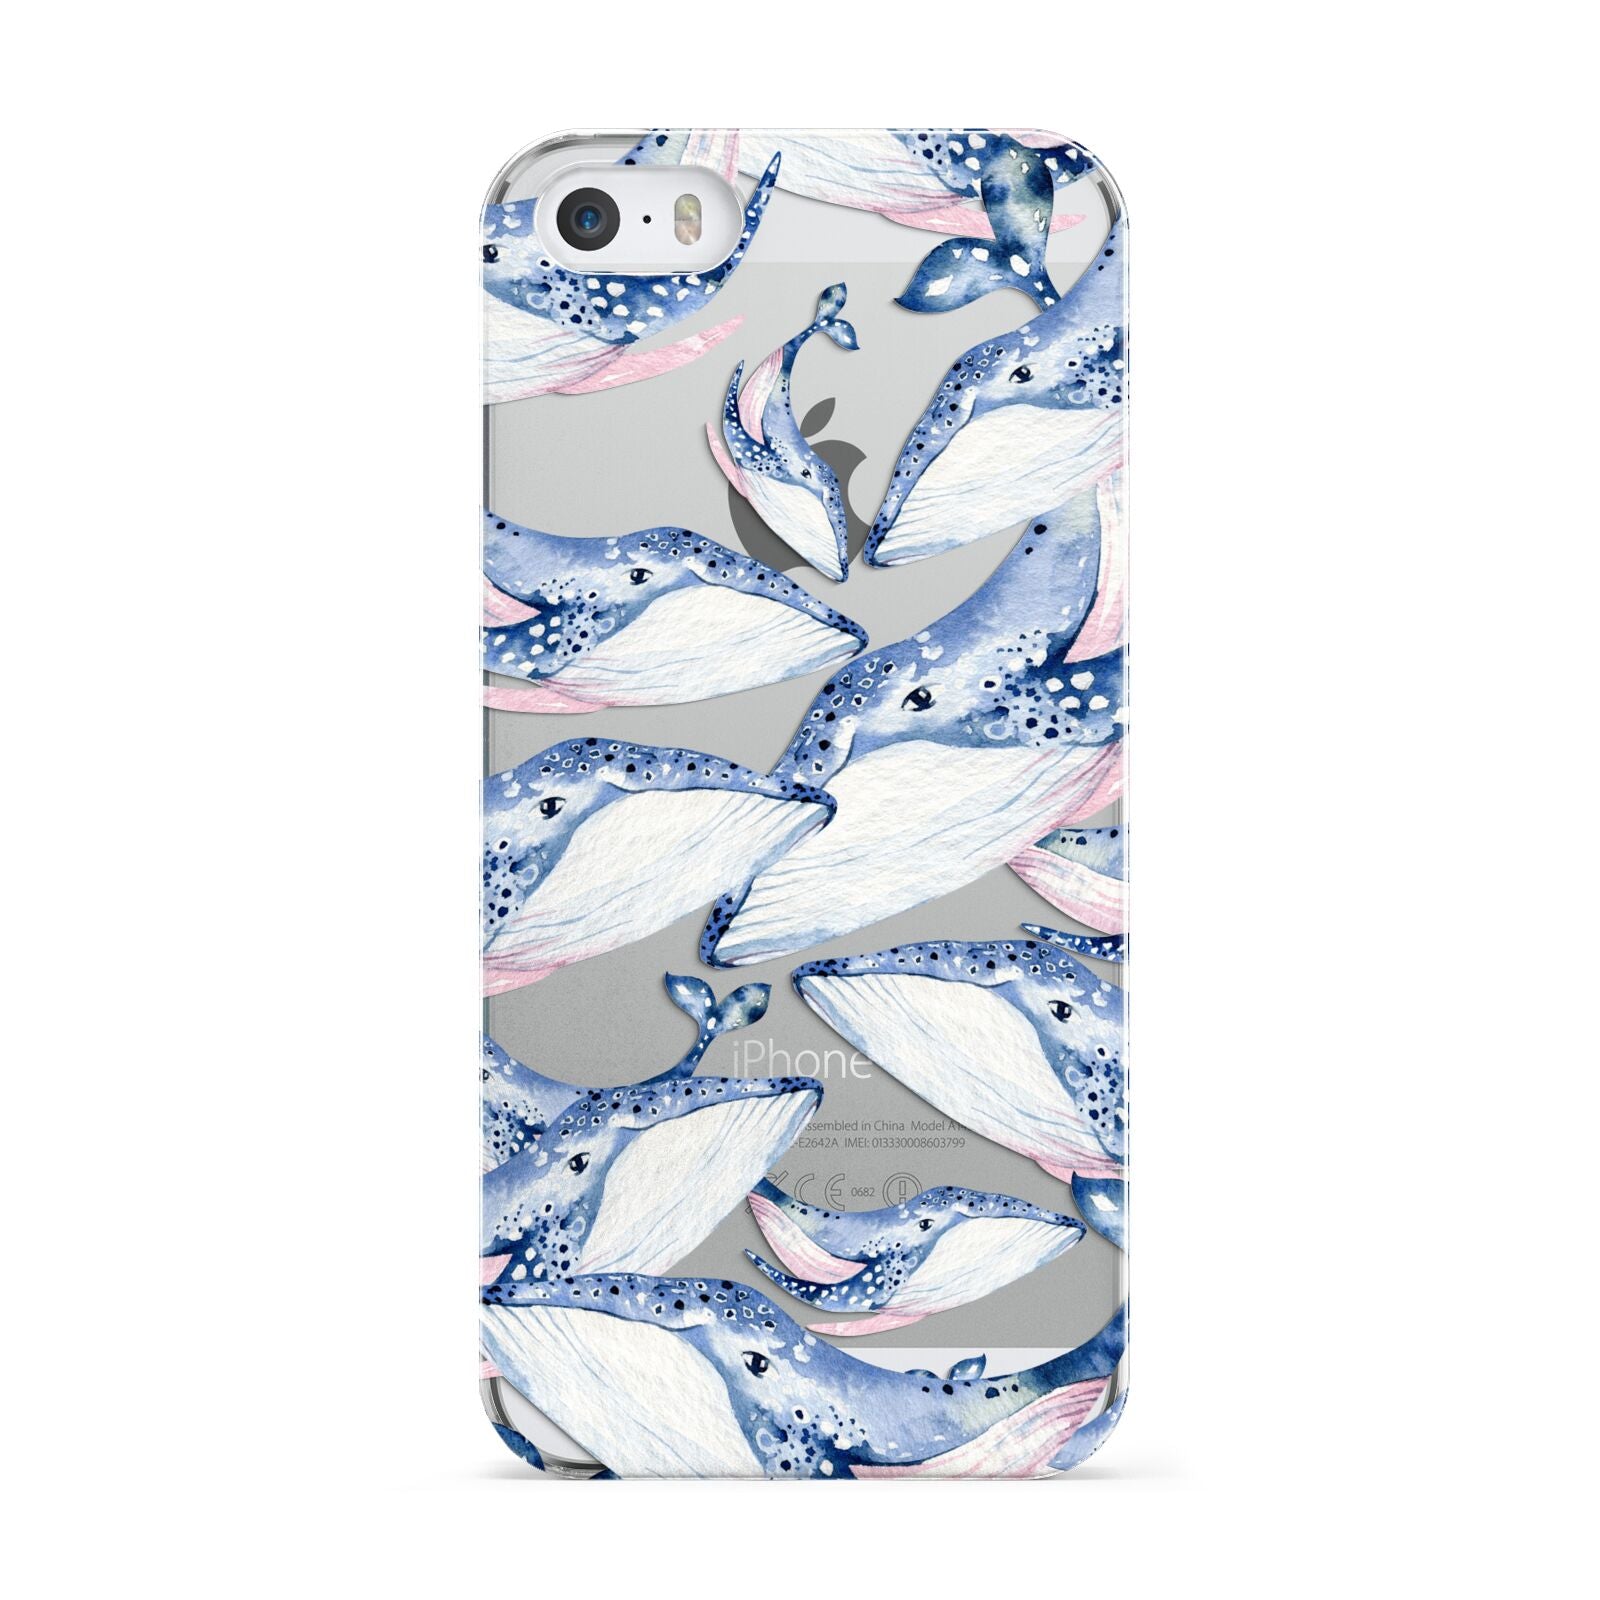 Whale Apple iPhone 5 Case